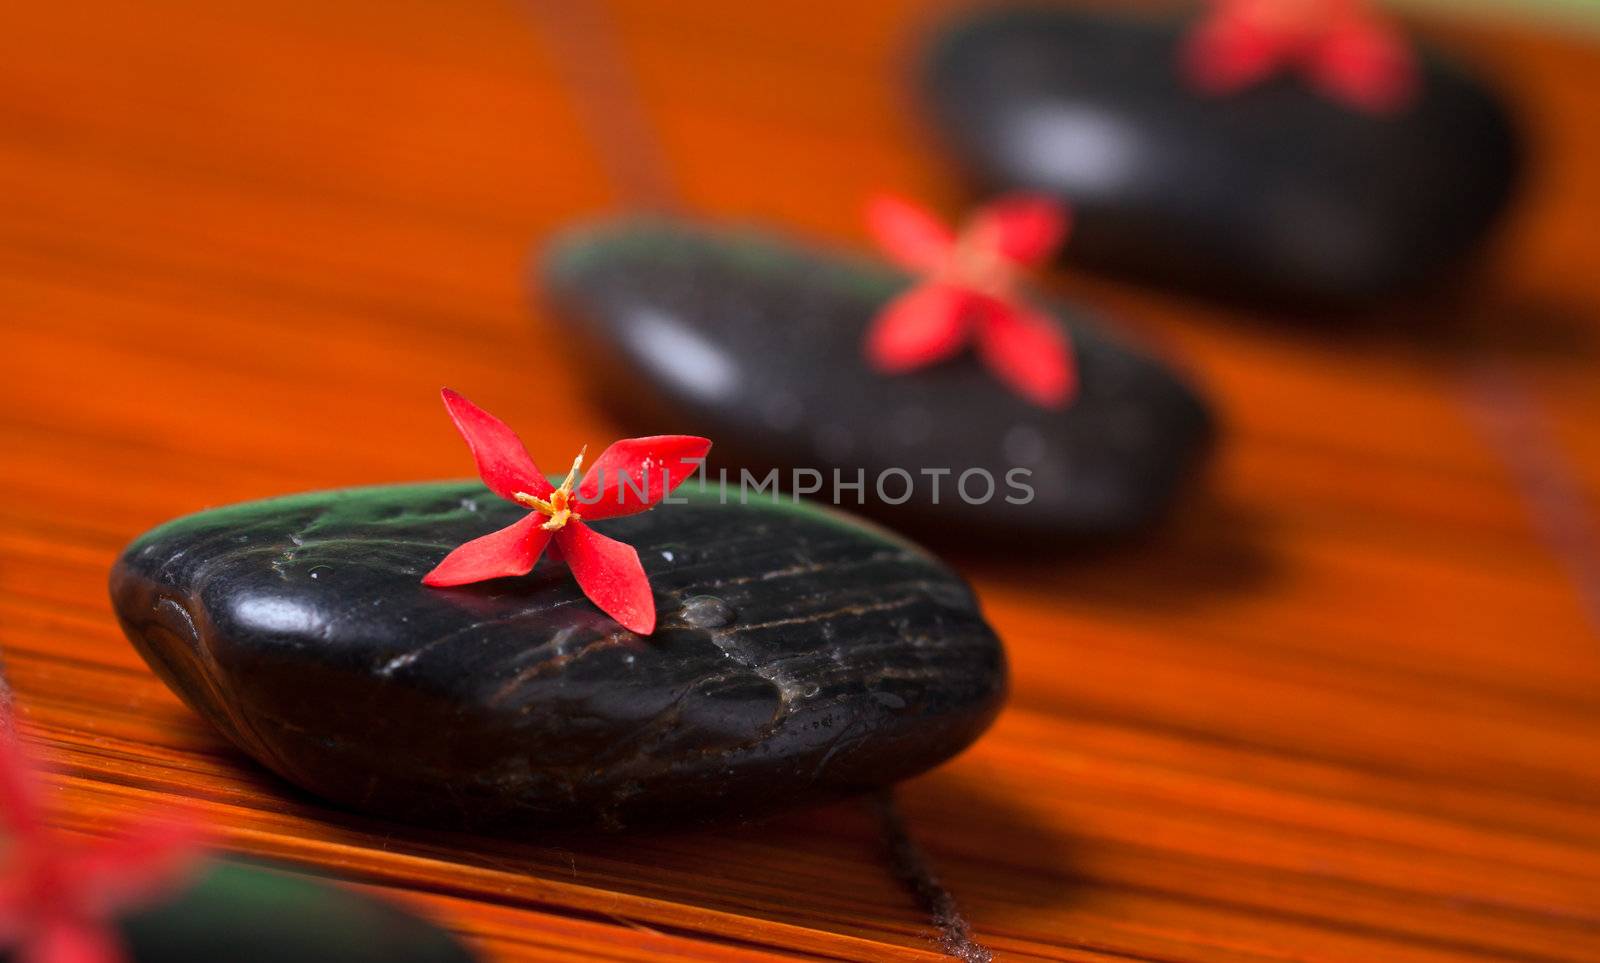 Health spa & massage still life: Black hot rocks with red flowers